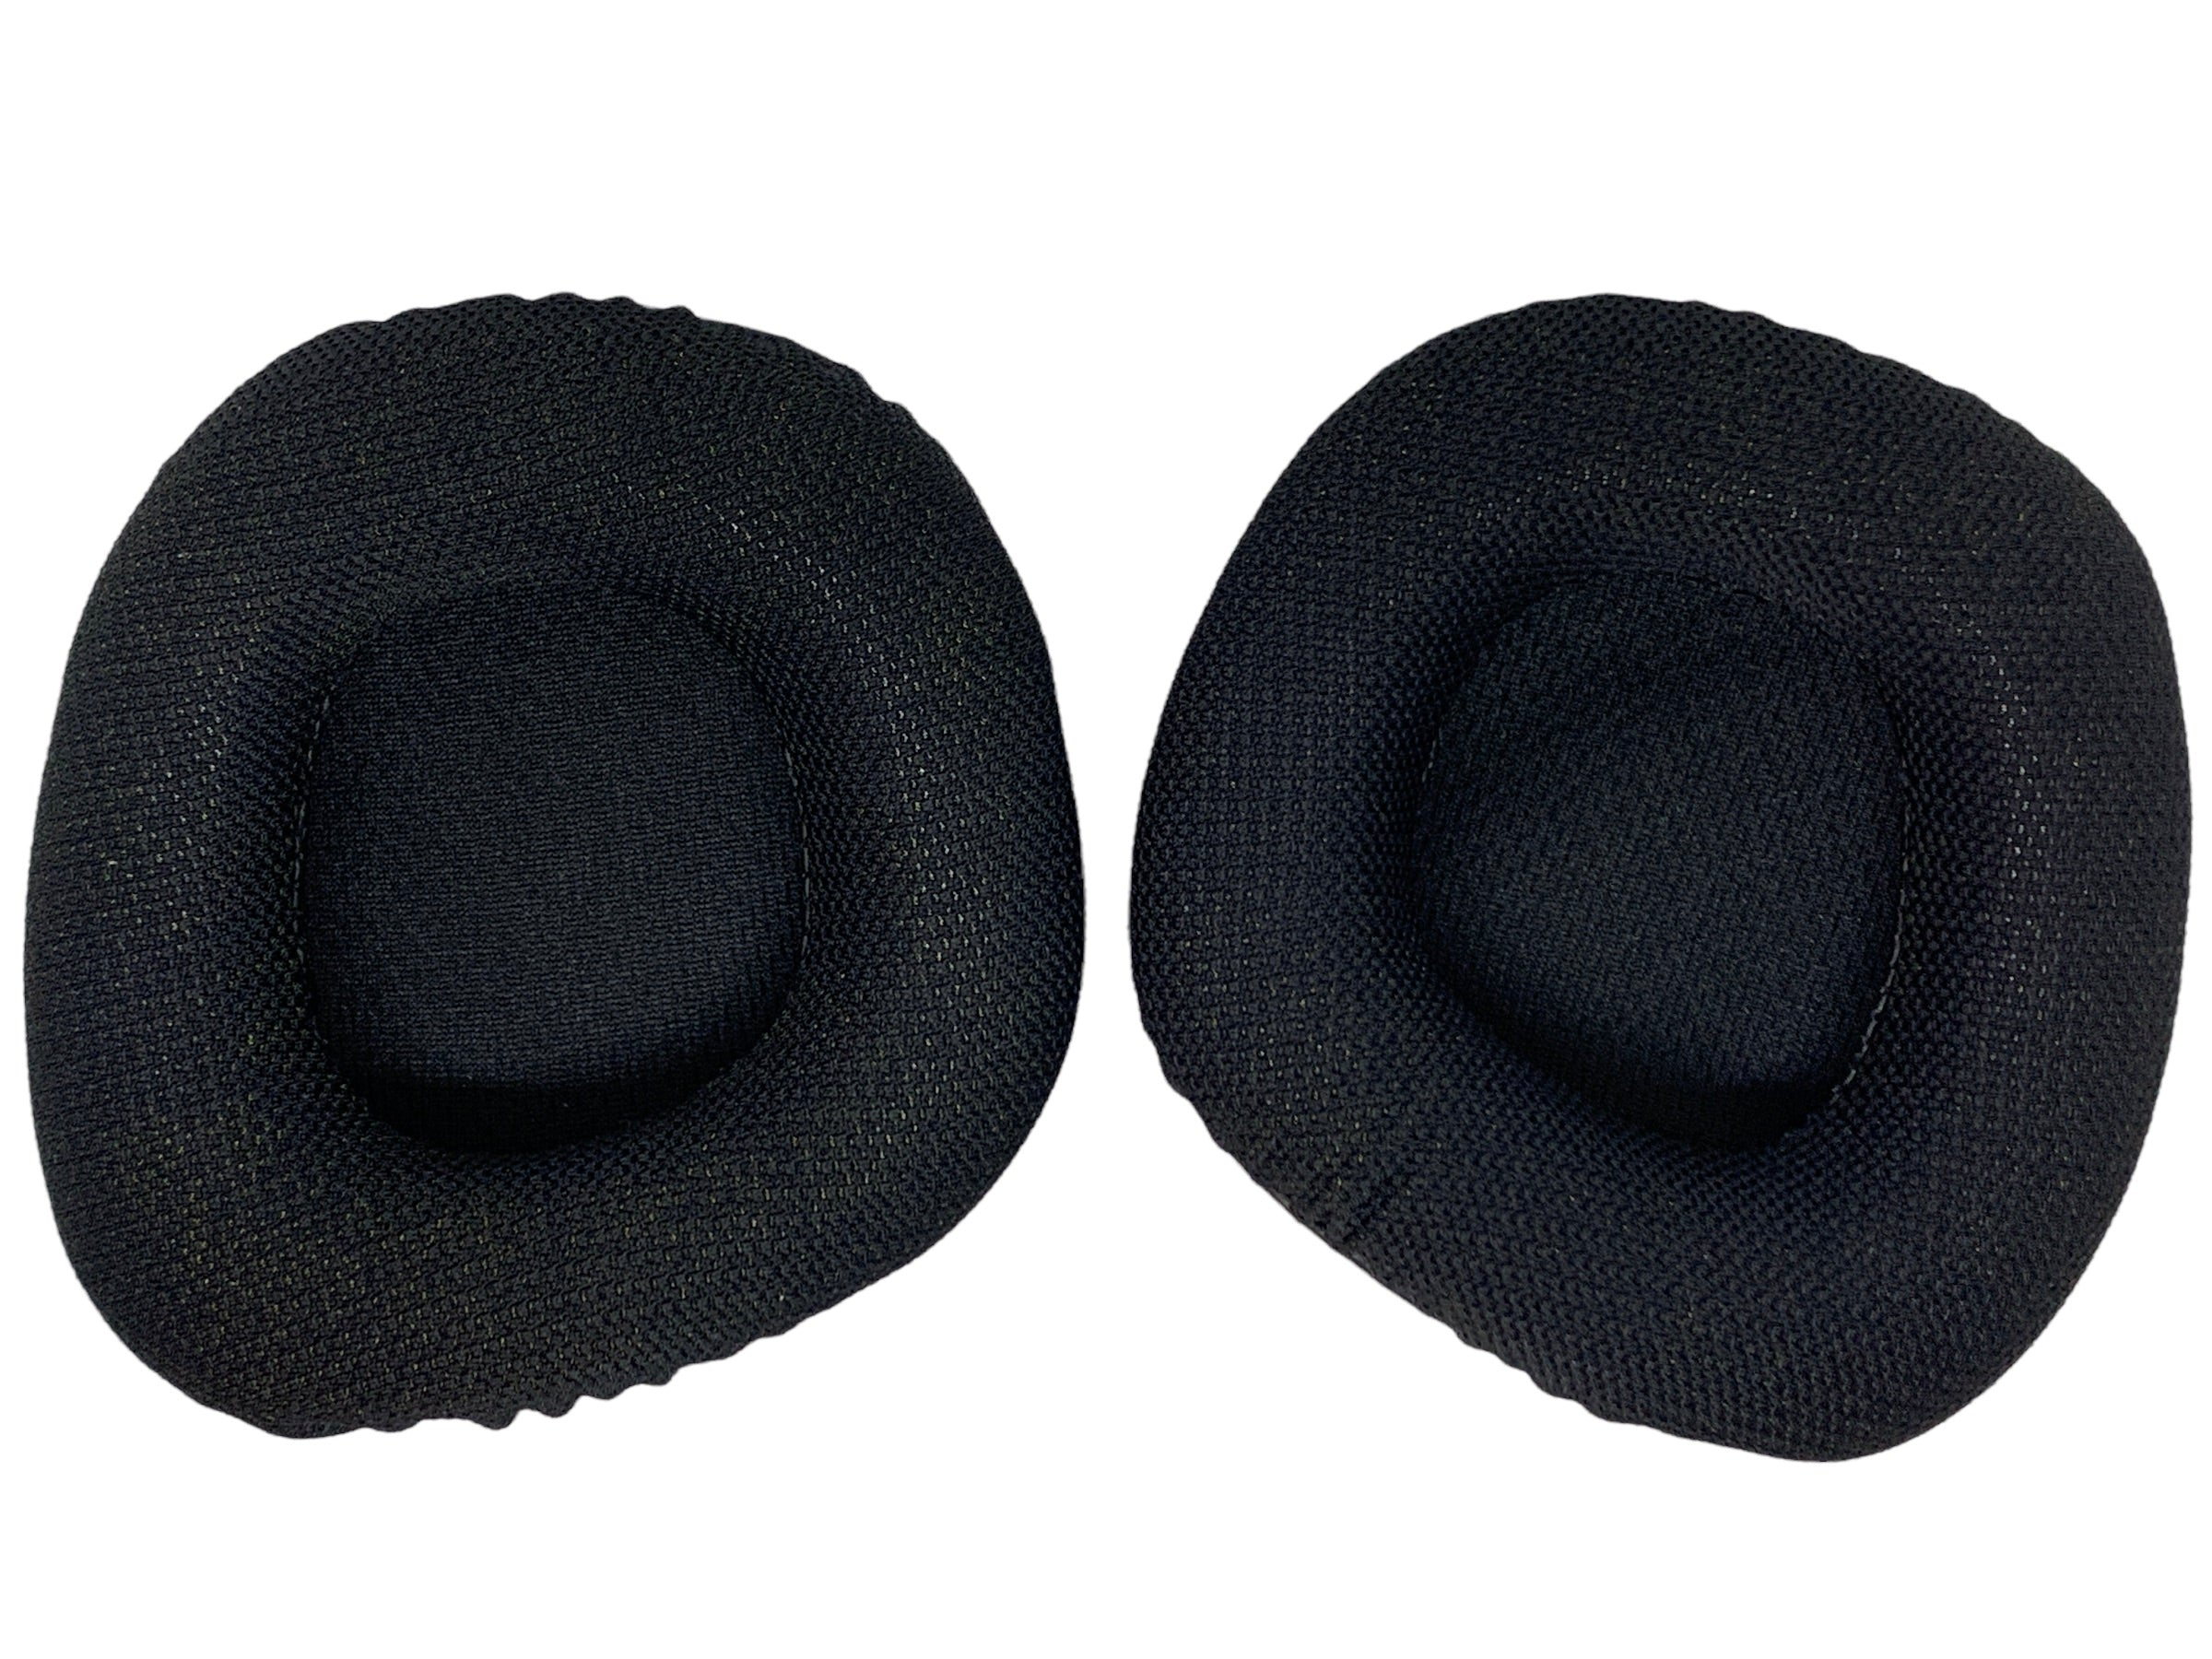 CentralSound Replacement Ear Pad Cushions Headband for Corsair VOID PRO Gaming Headset - CentralSound